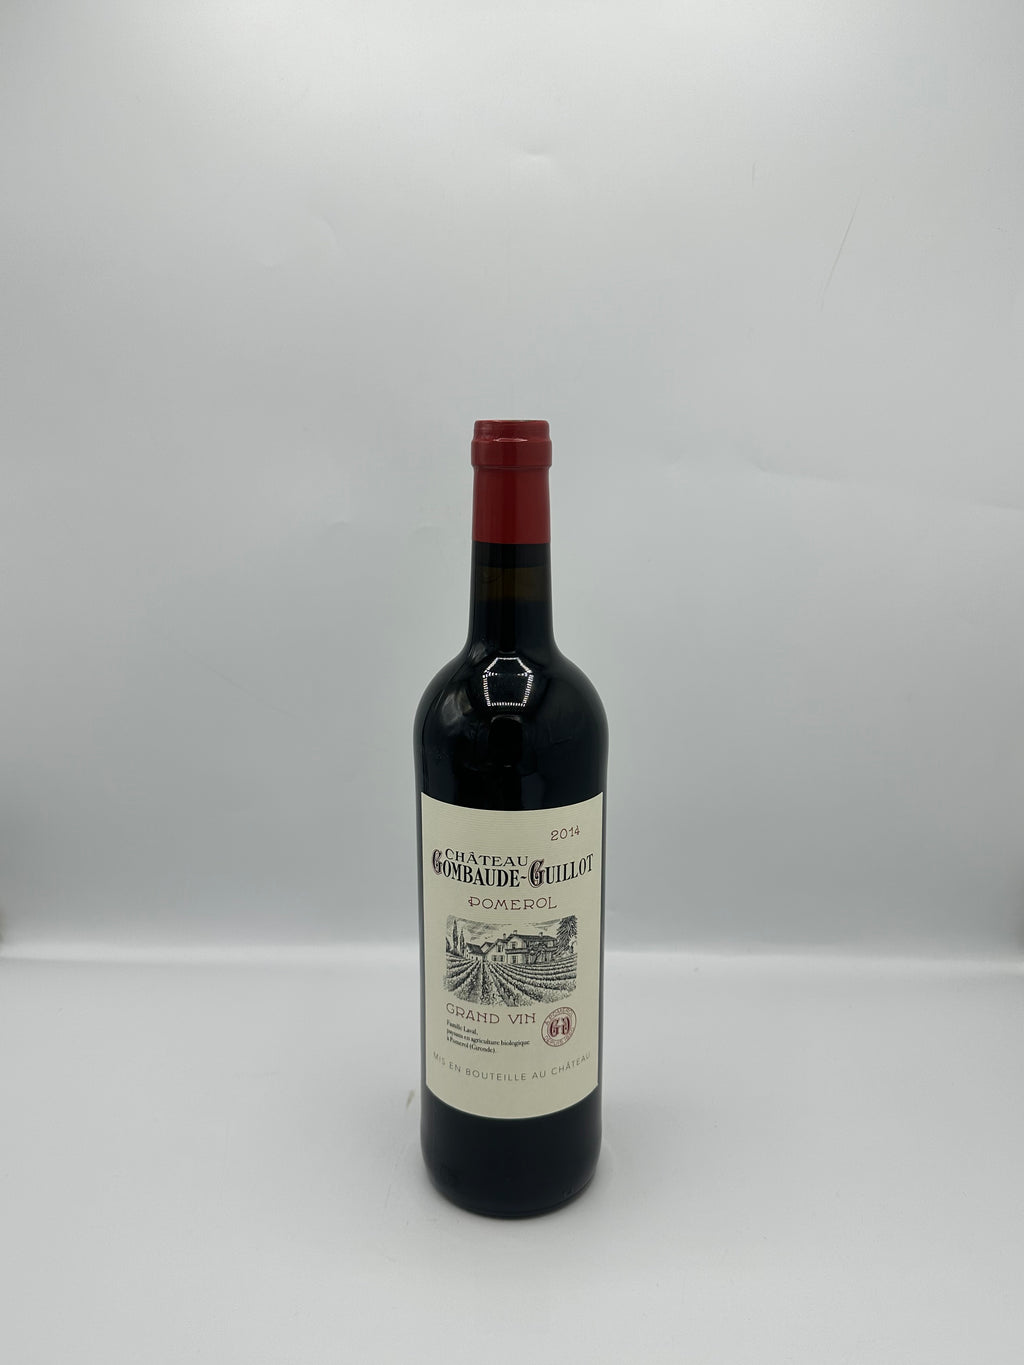 Pomerol 2014 Red - Chateau Gombaude-Guillot 